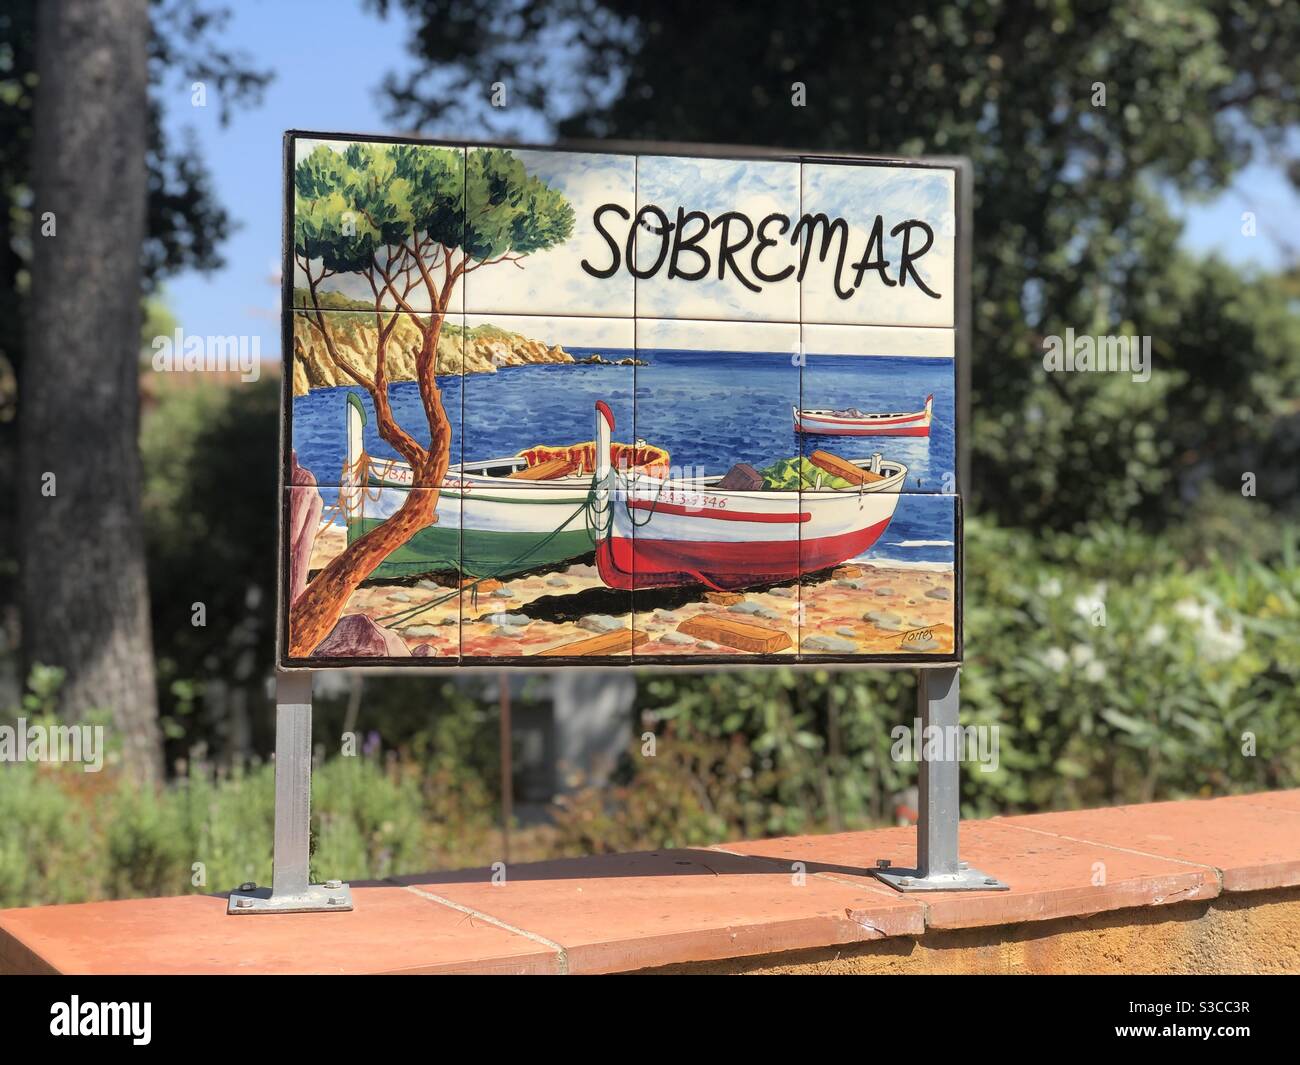 Sign of Sobremar where there are boats on the sign Stock Photo